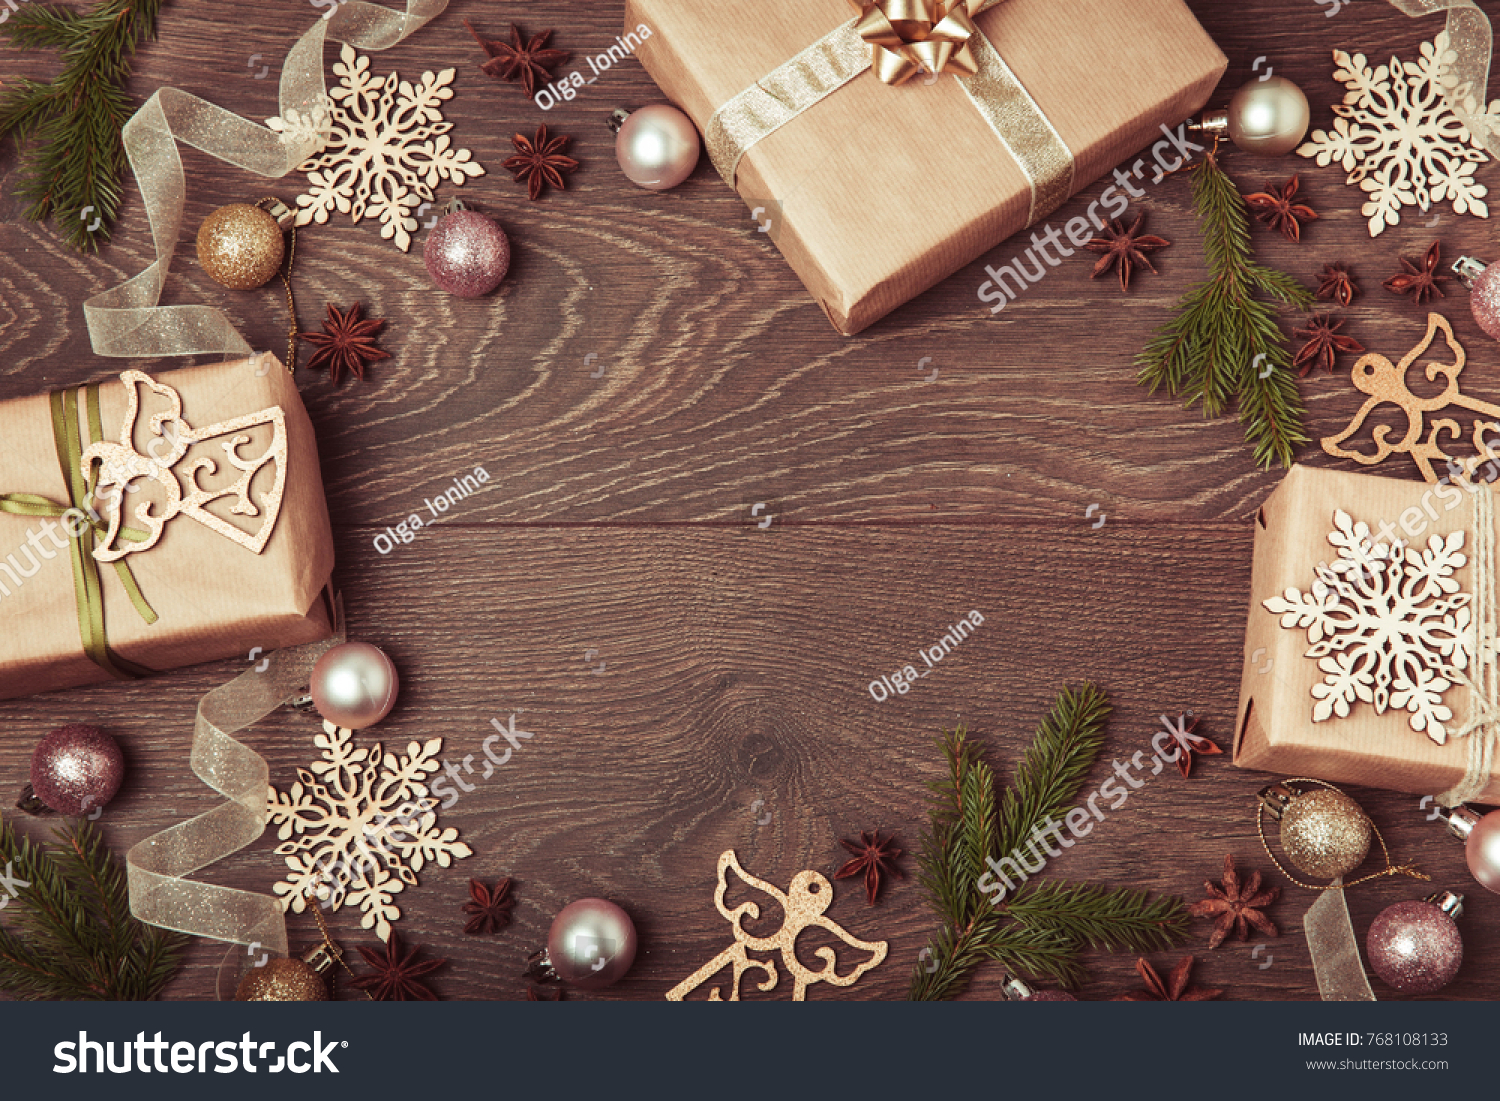 Christmas holiday composition, ornament. Festive creative gold pattern, spruce branches, xmas tree, xmas golden decor holiday ball with gift and ribbon on wooden brown background. Flat lay, top view #768108133